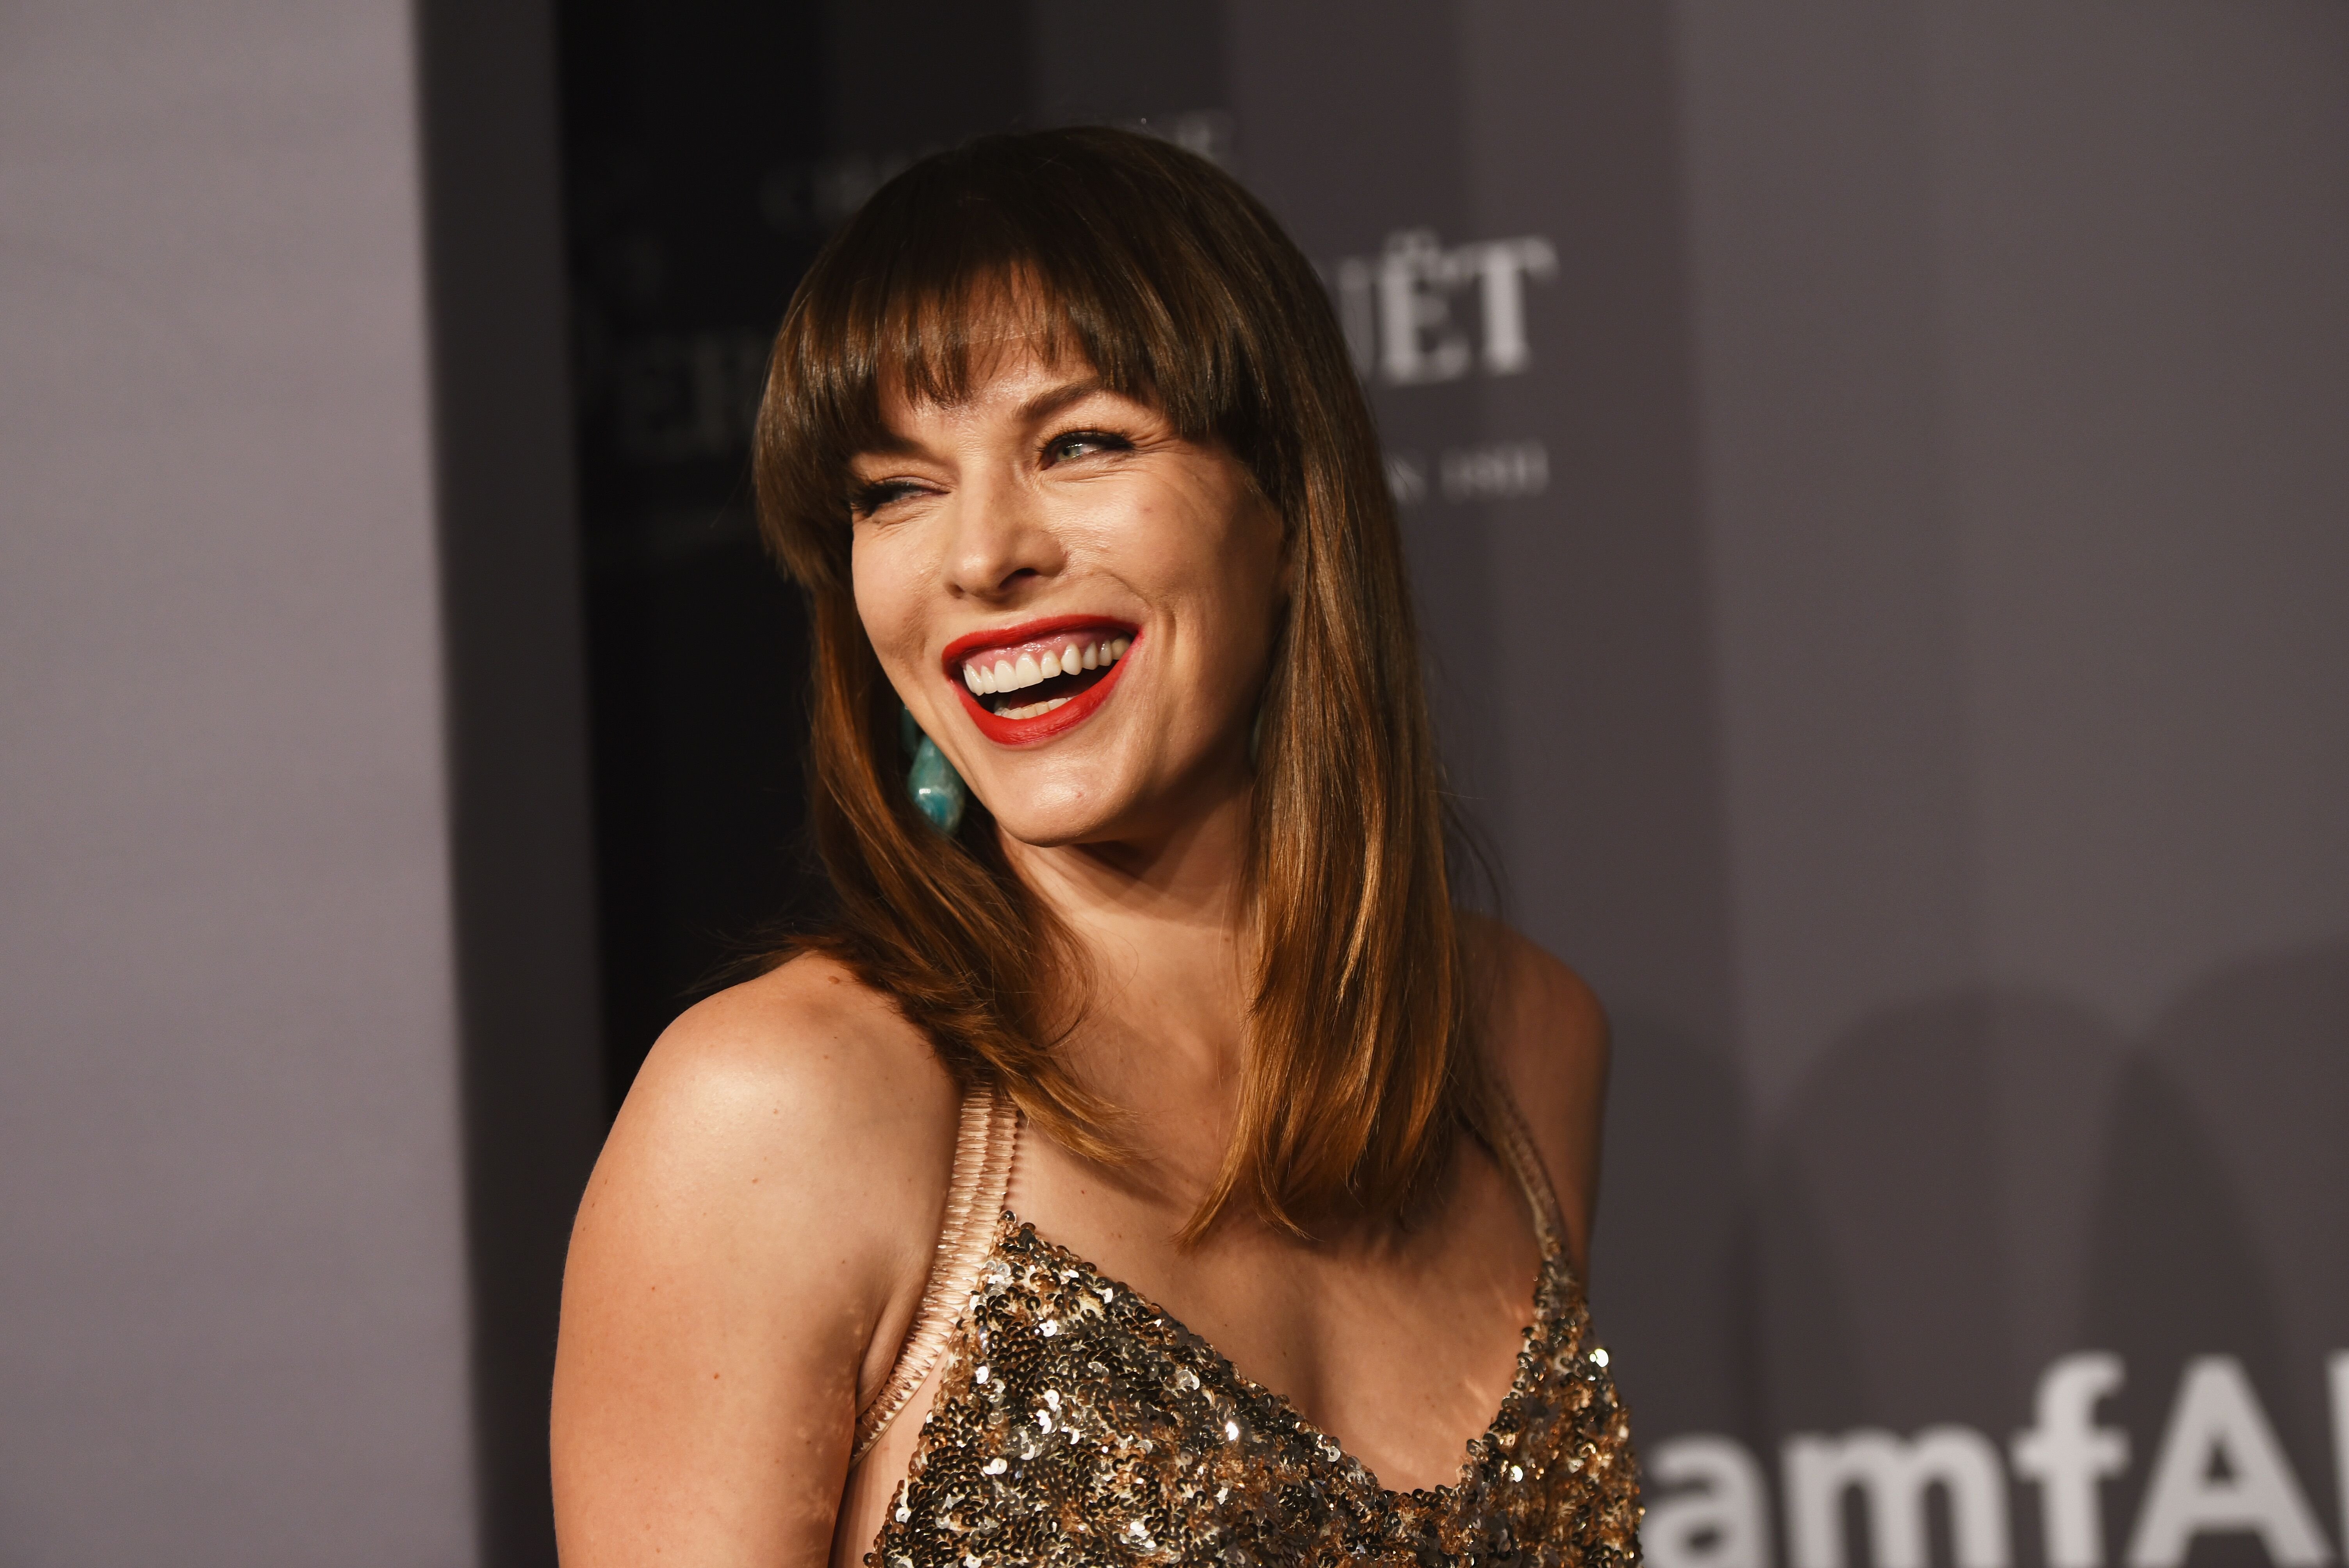 Milla Jovovich attends the amfAR New York Gala 2019 at Cipriani Wall Street in New York City | Photo: Getty Images